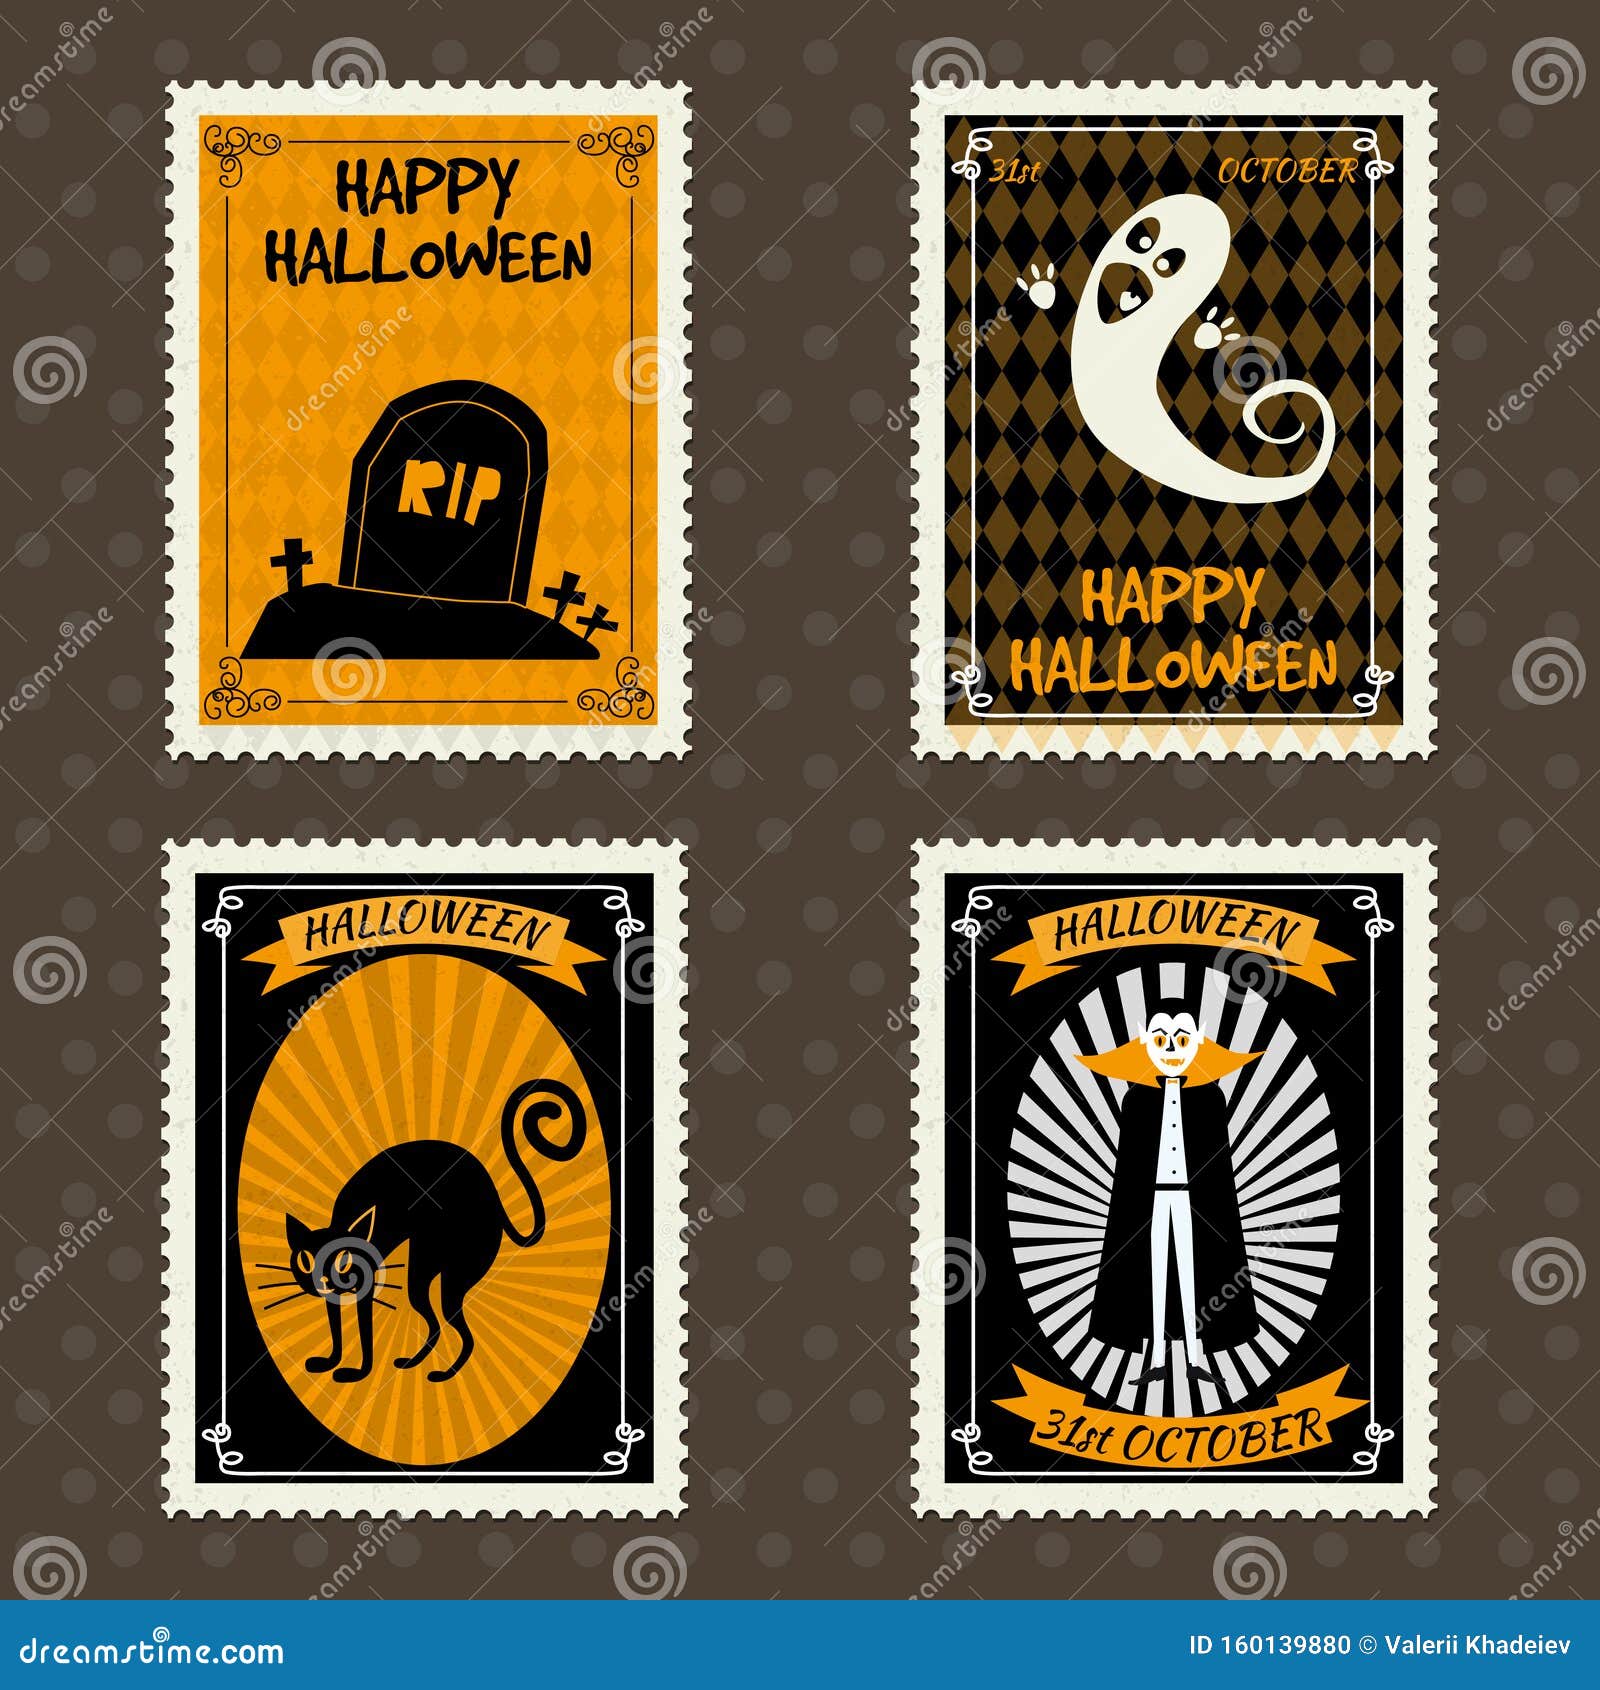 Happy Halloween Postage Stamps with Ghost, Vampire, Black Cat Grave